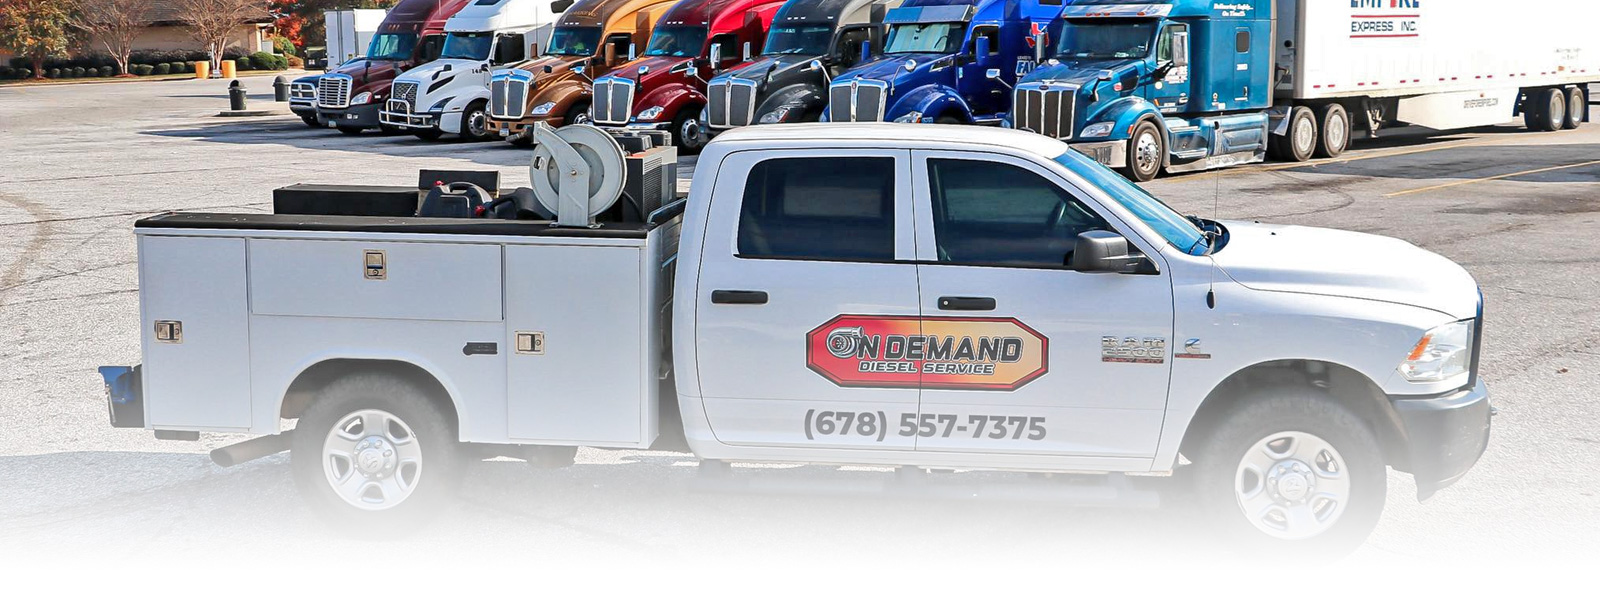 On Demand Diesel offers a wide range of used vehicles to Homer, GA and surrounding areas.